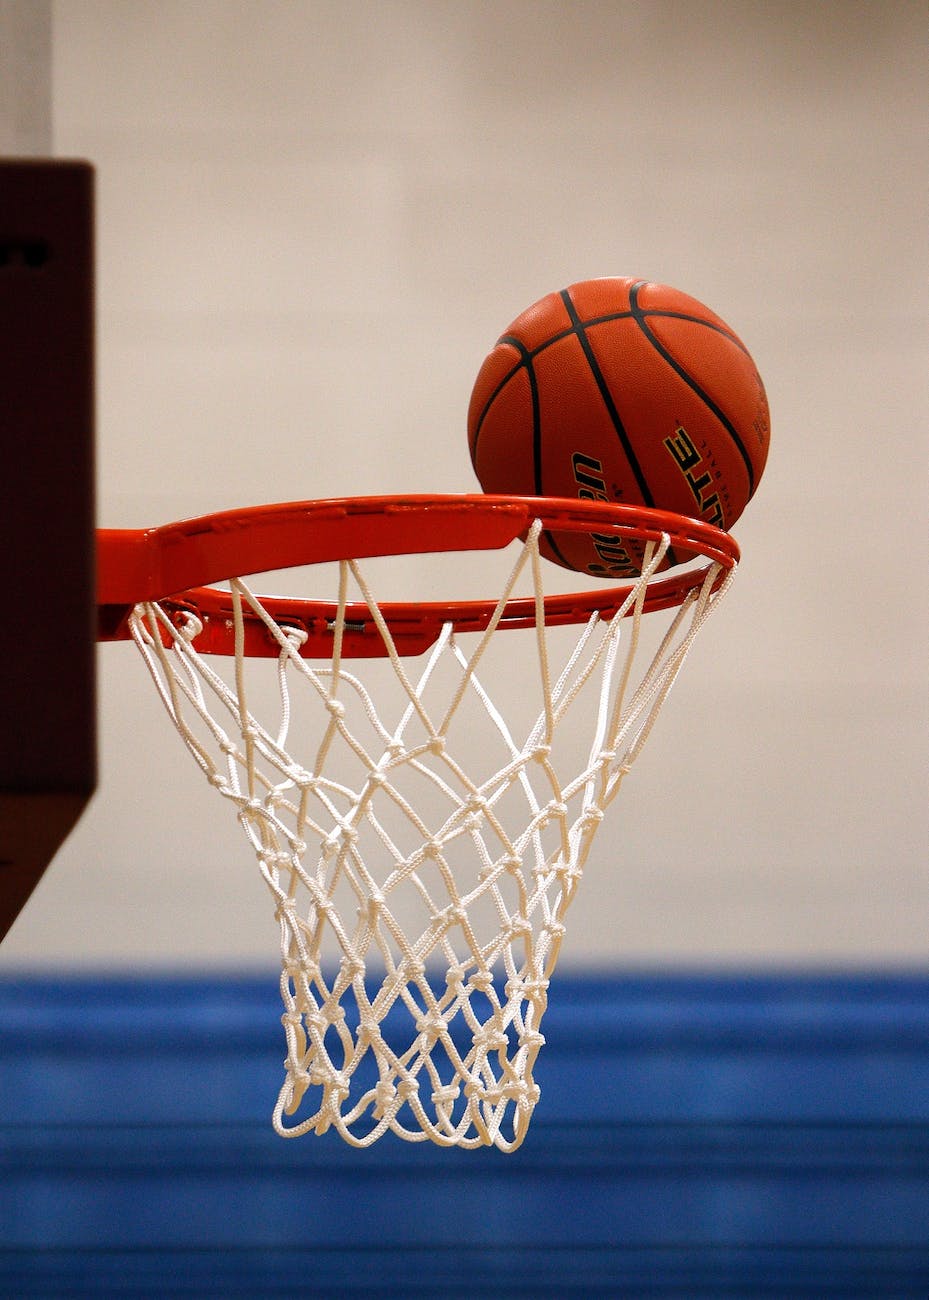 The Top 5 Affordable Rubber Basketballs for Every Budget-Conscious Player